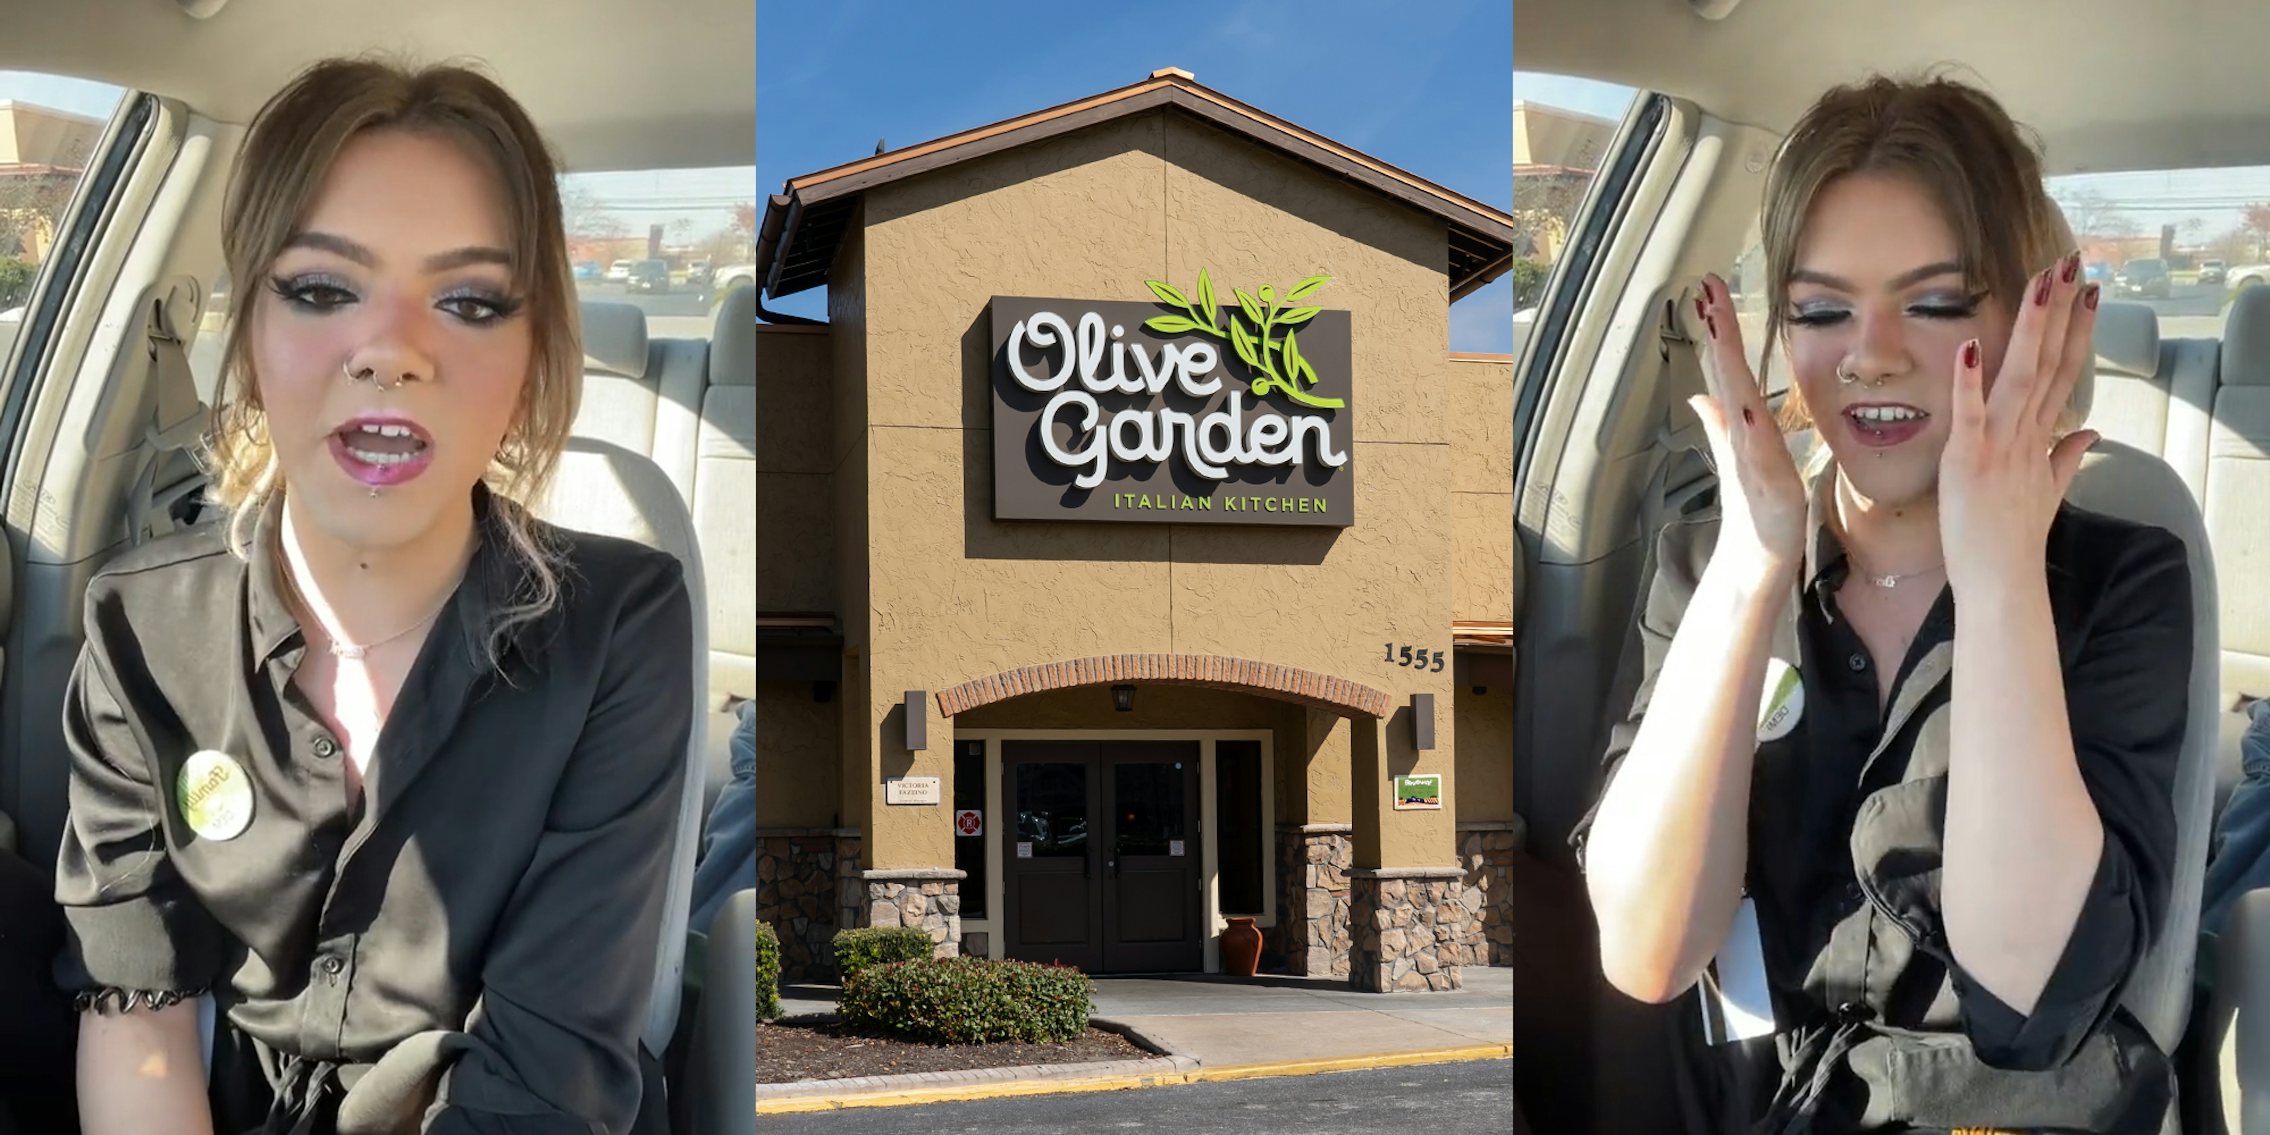 Olive Garden employee speaking in car (l) Olive Garden building with sign and blue sky (c) Olive Garden worker speaking in car (r)